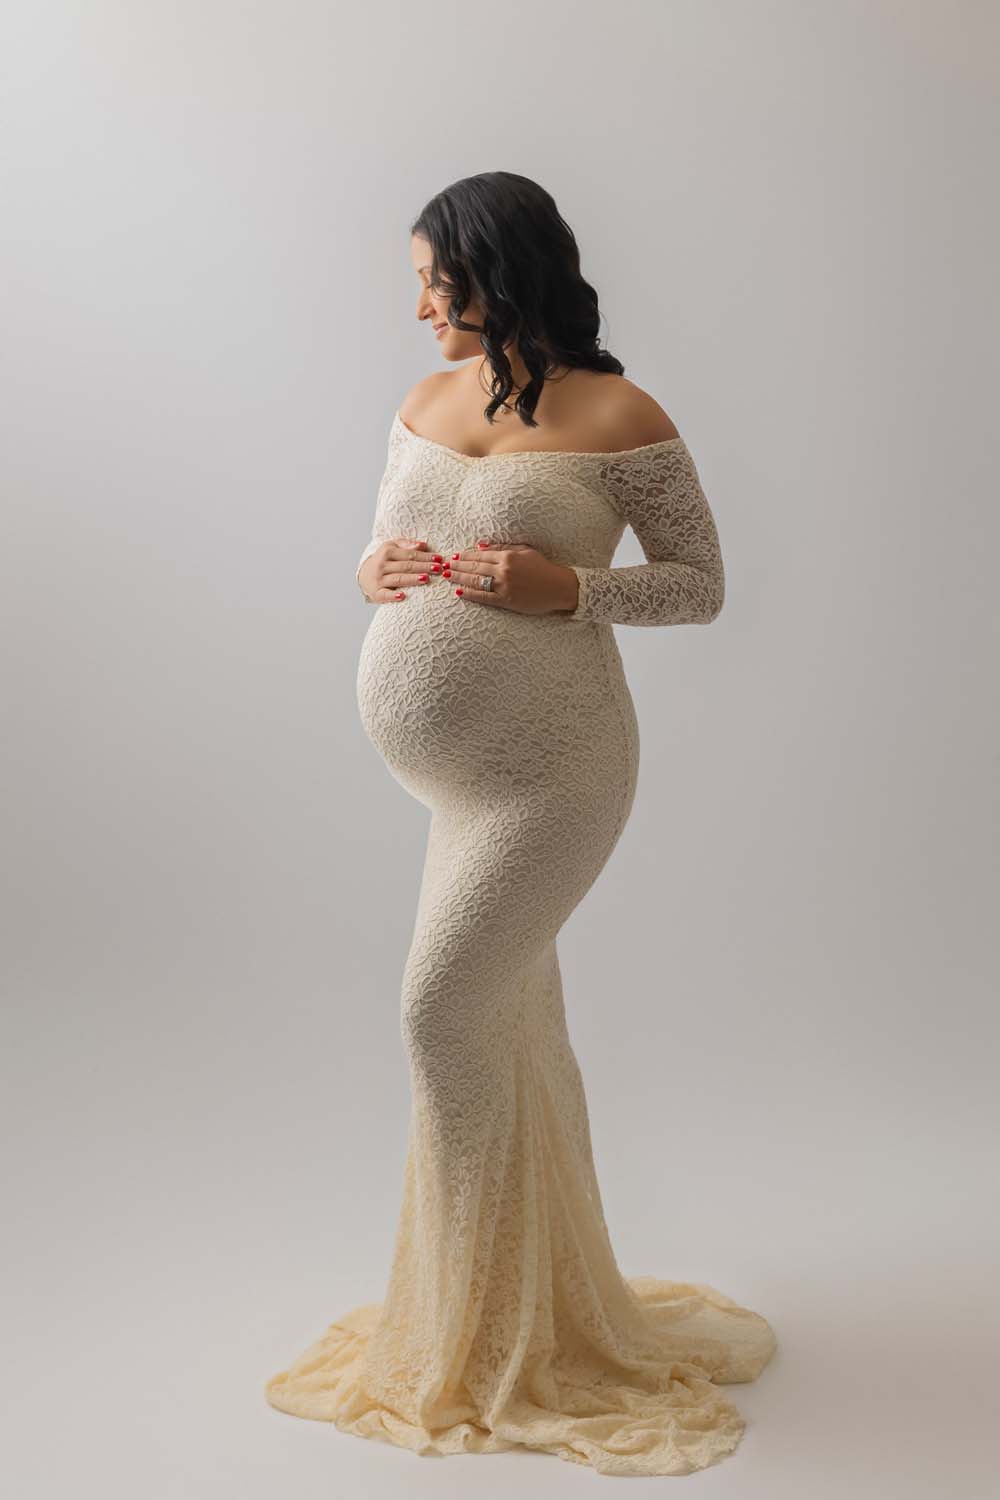 pregnant mom posed for maternity photo